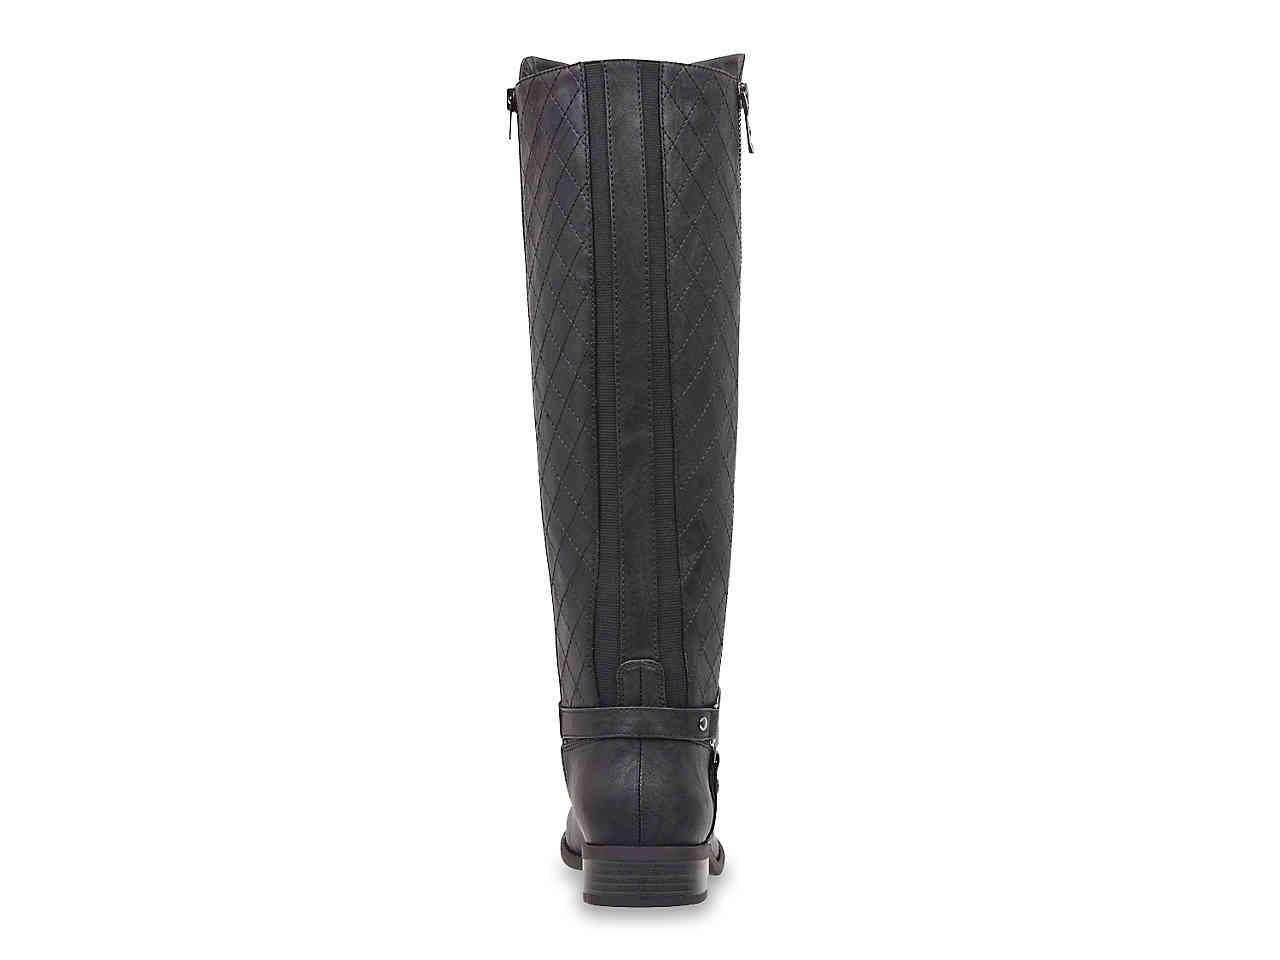 g by guess horton riding boot